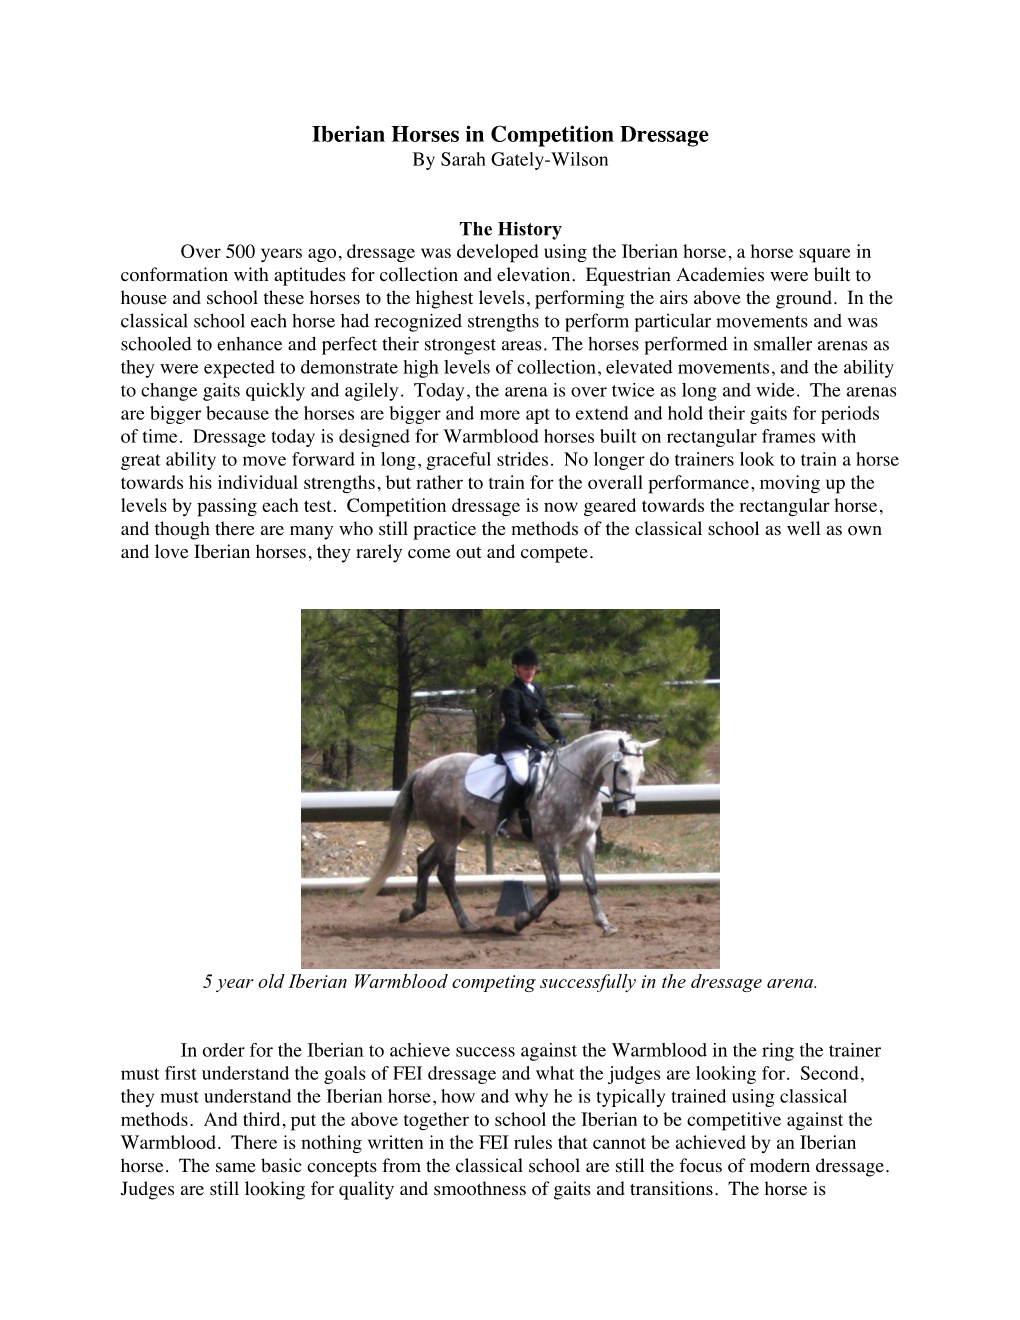 Iberian Horses in Competition Dressage by Sarah Gately-Wilson